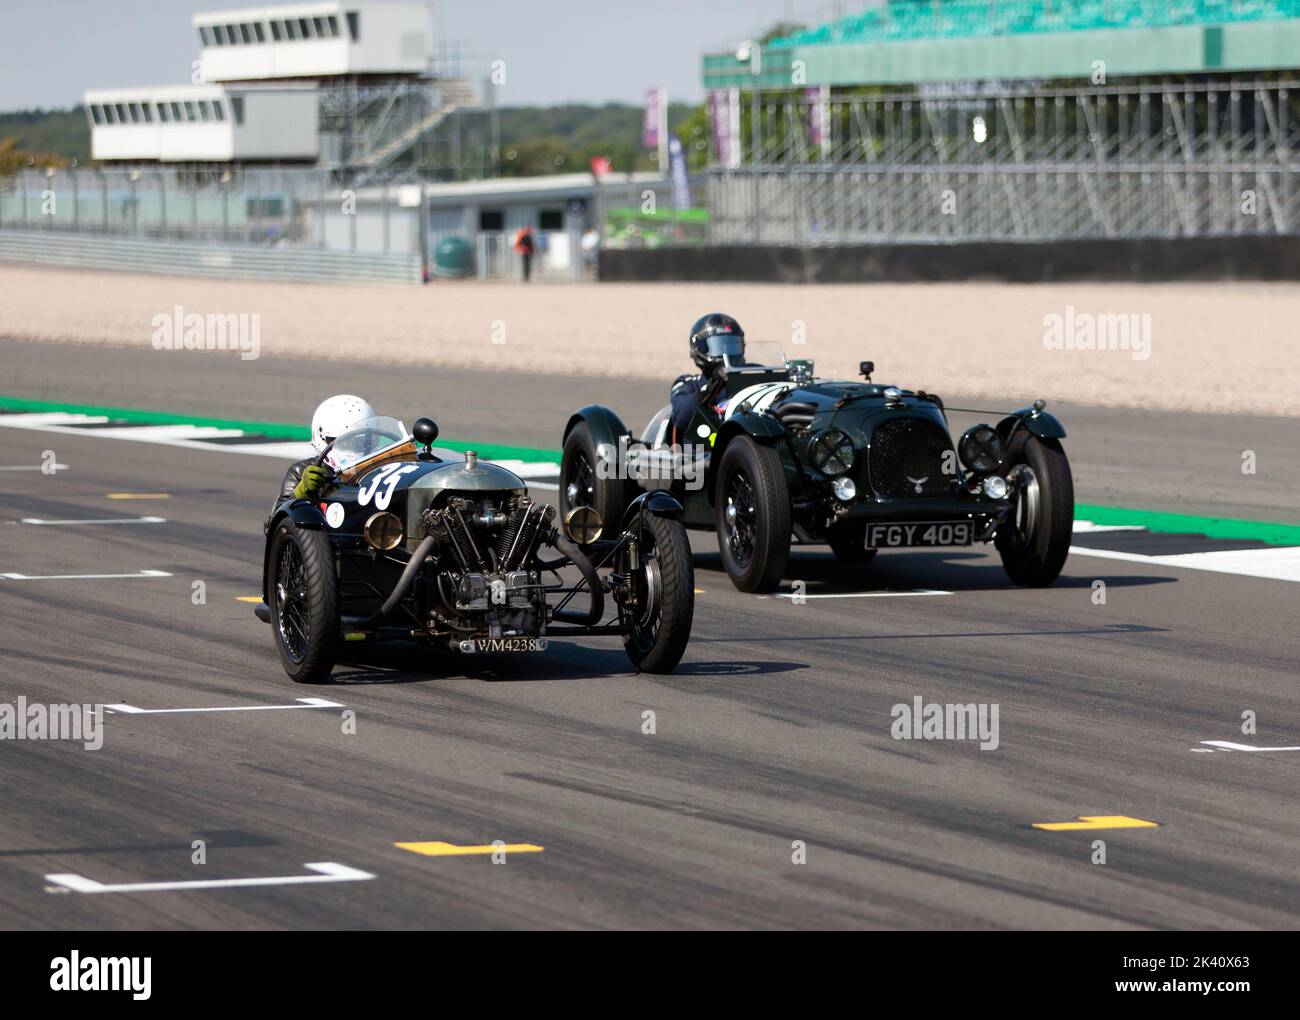 Sue Darbyshire in the Morgan Super Aero, passing Alan Middleton's  Aston Martin Speed 'Red Dragon', during the MRL Pre-War Sports Cars 'BRDC 500' Race Stock Photo